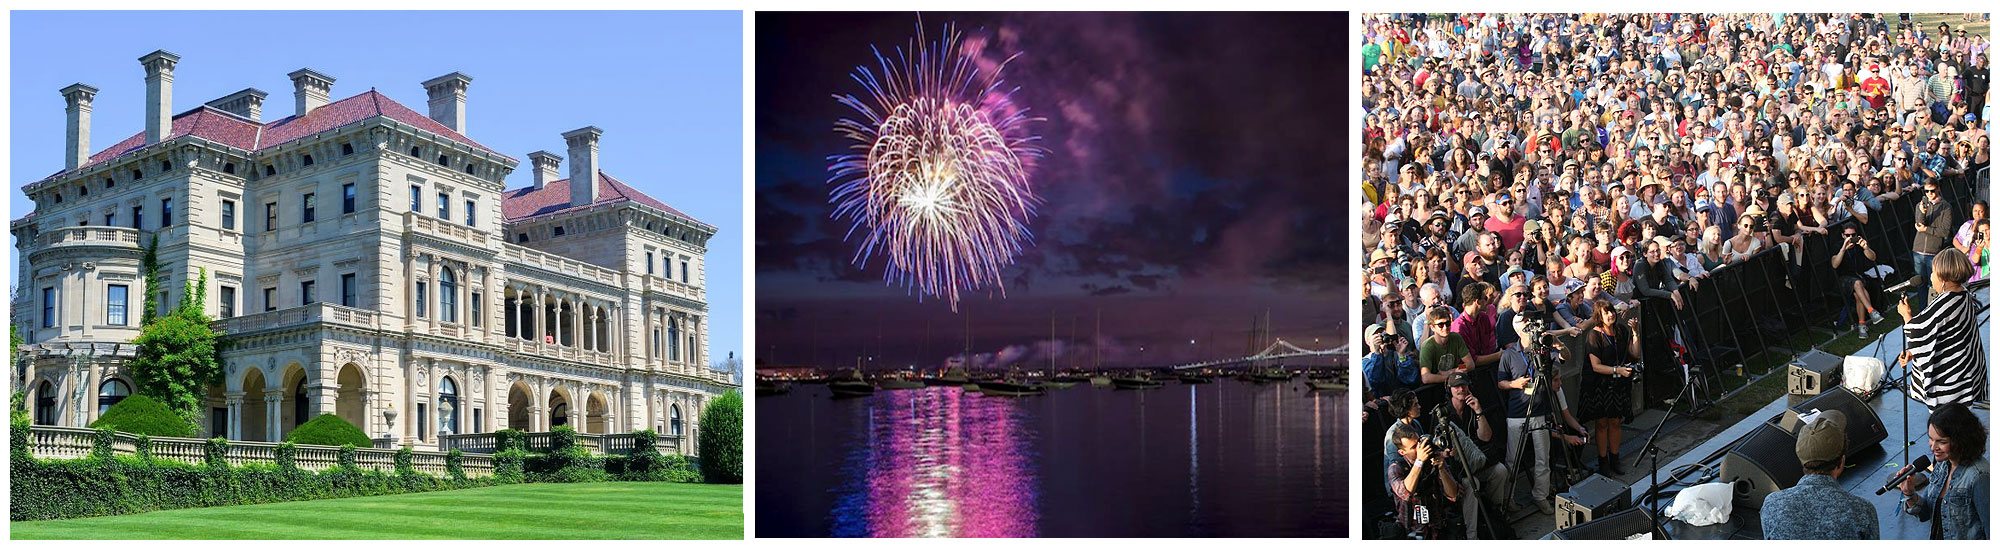 Newport RI Events Calendar 2020 Festivals and Things To Do